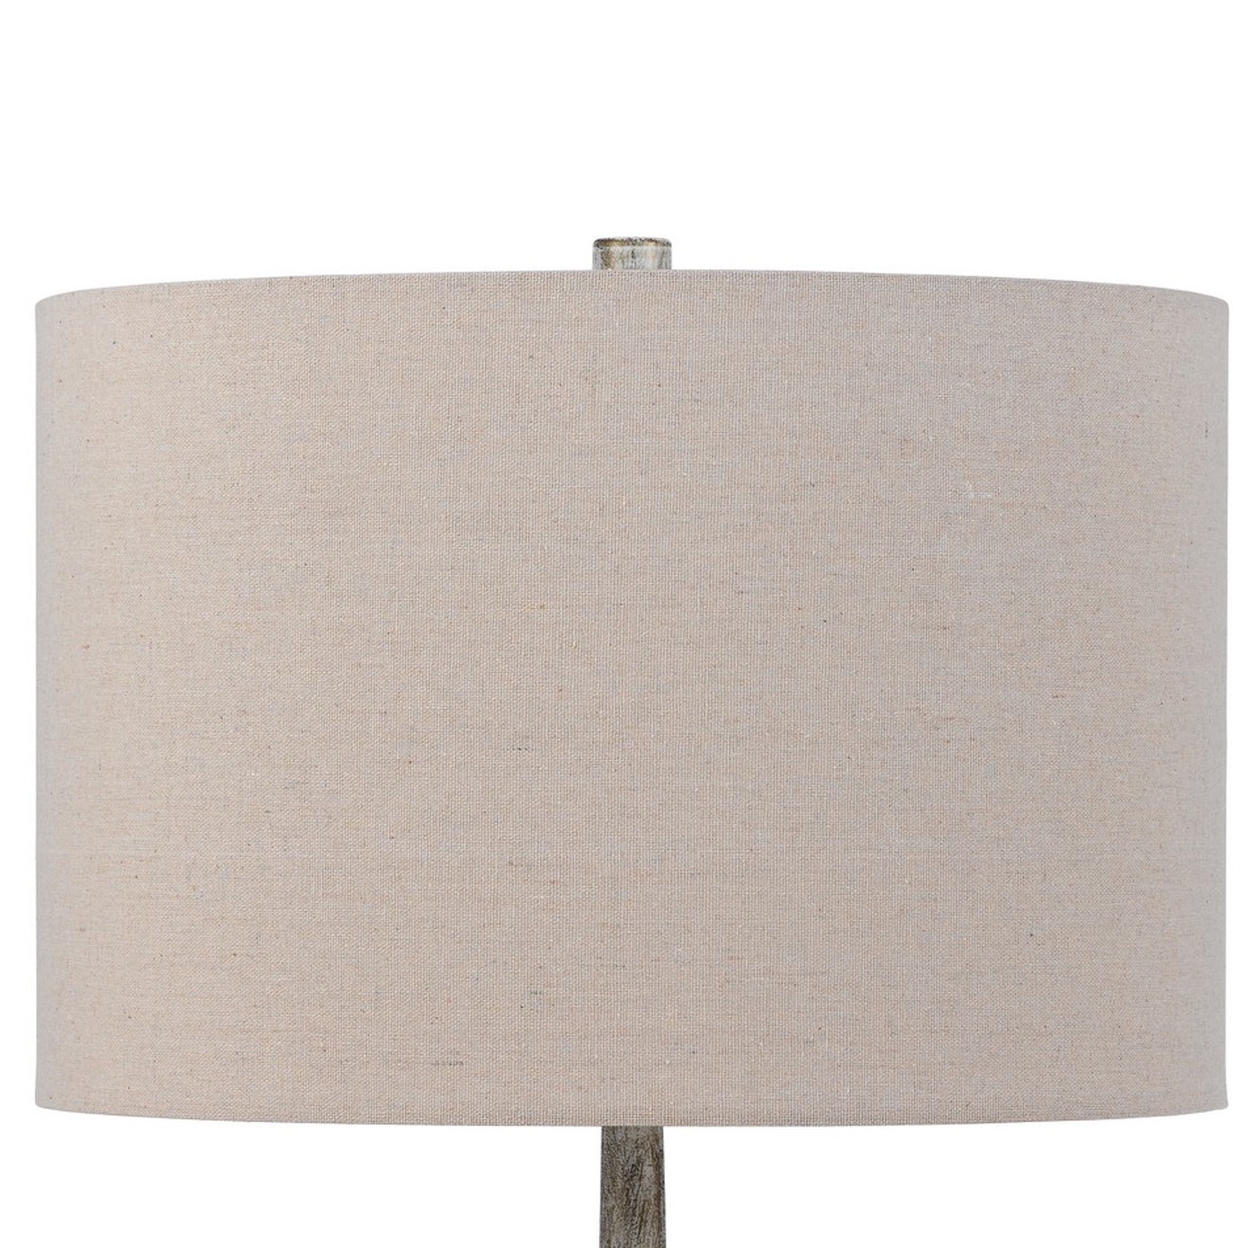 26 Inch Table Lamp, Set Of 2, Curved, Beige Fabric Shade, Distressed Gray- Saltoro Sherpi